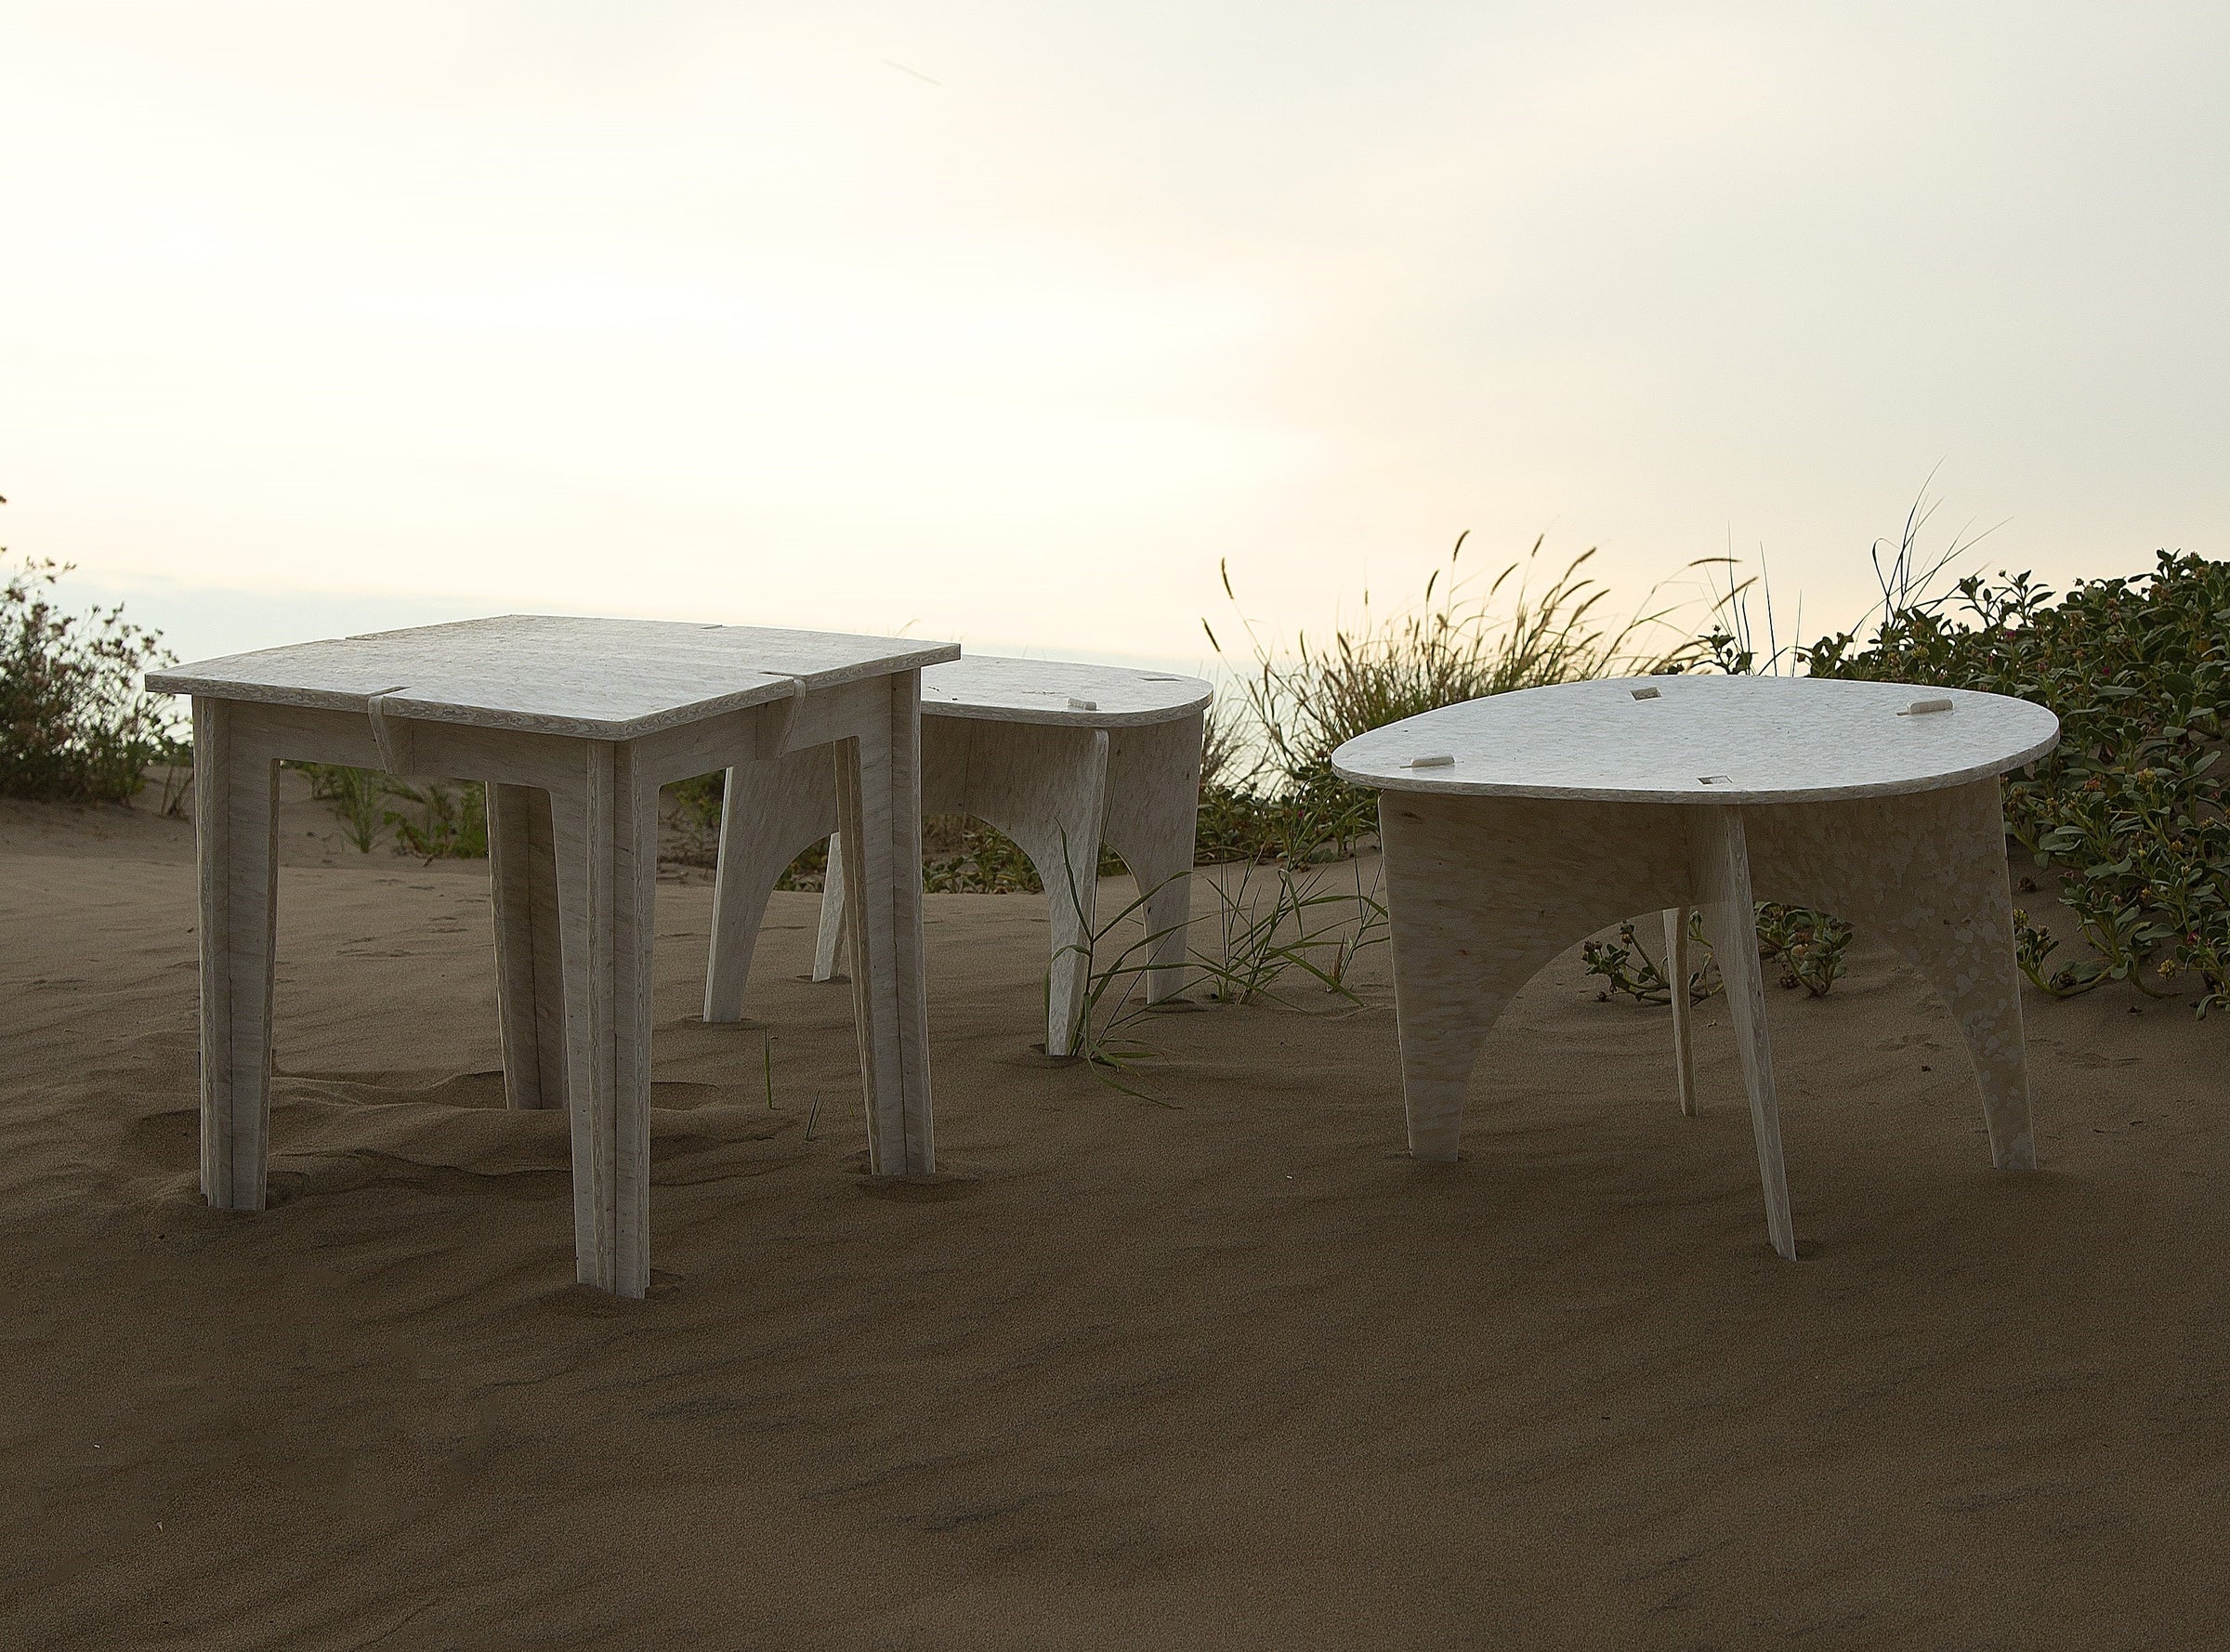 Three furniture tables on a sandy beach overlooking the ocean.